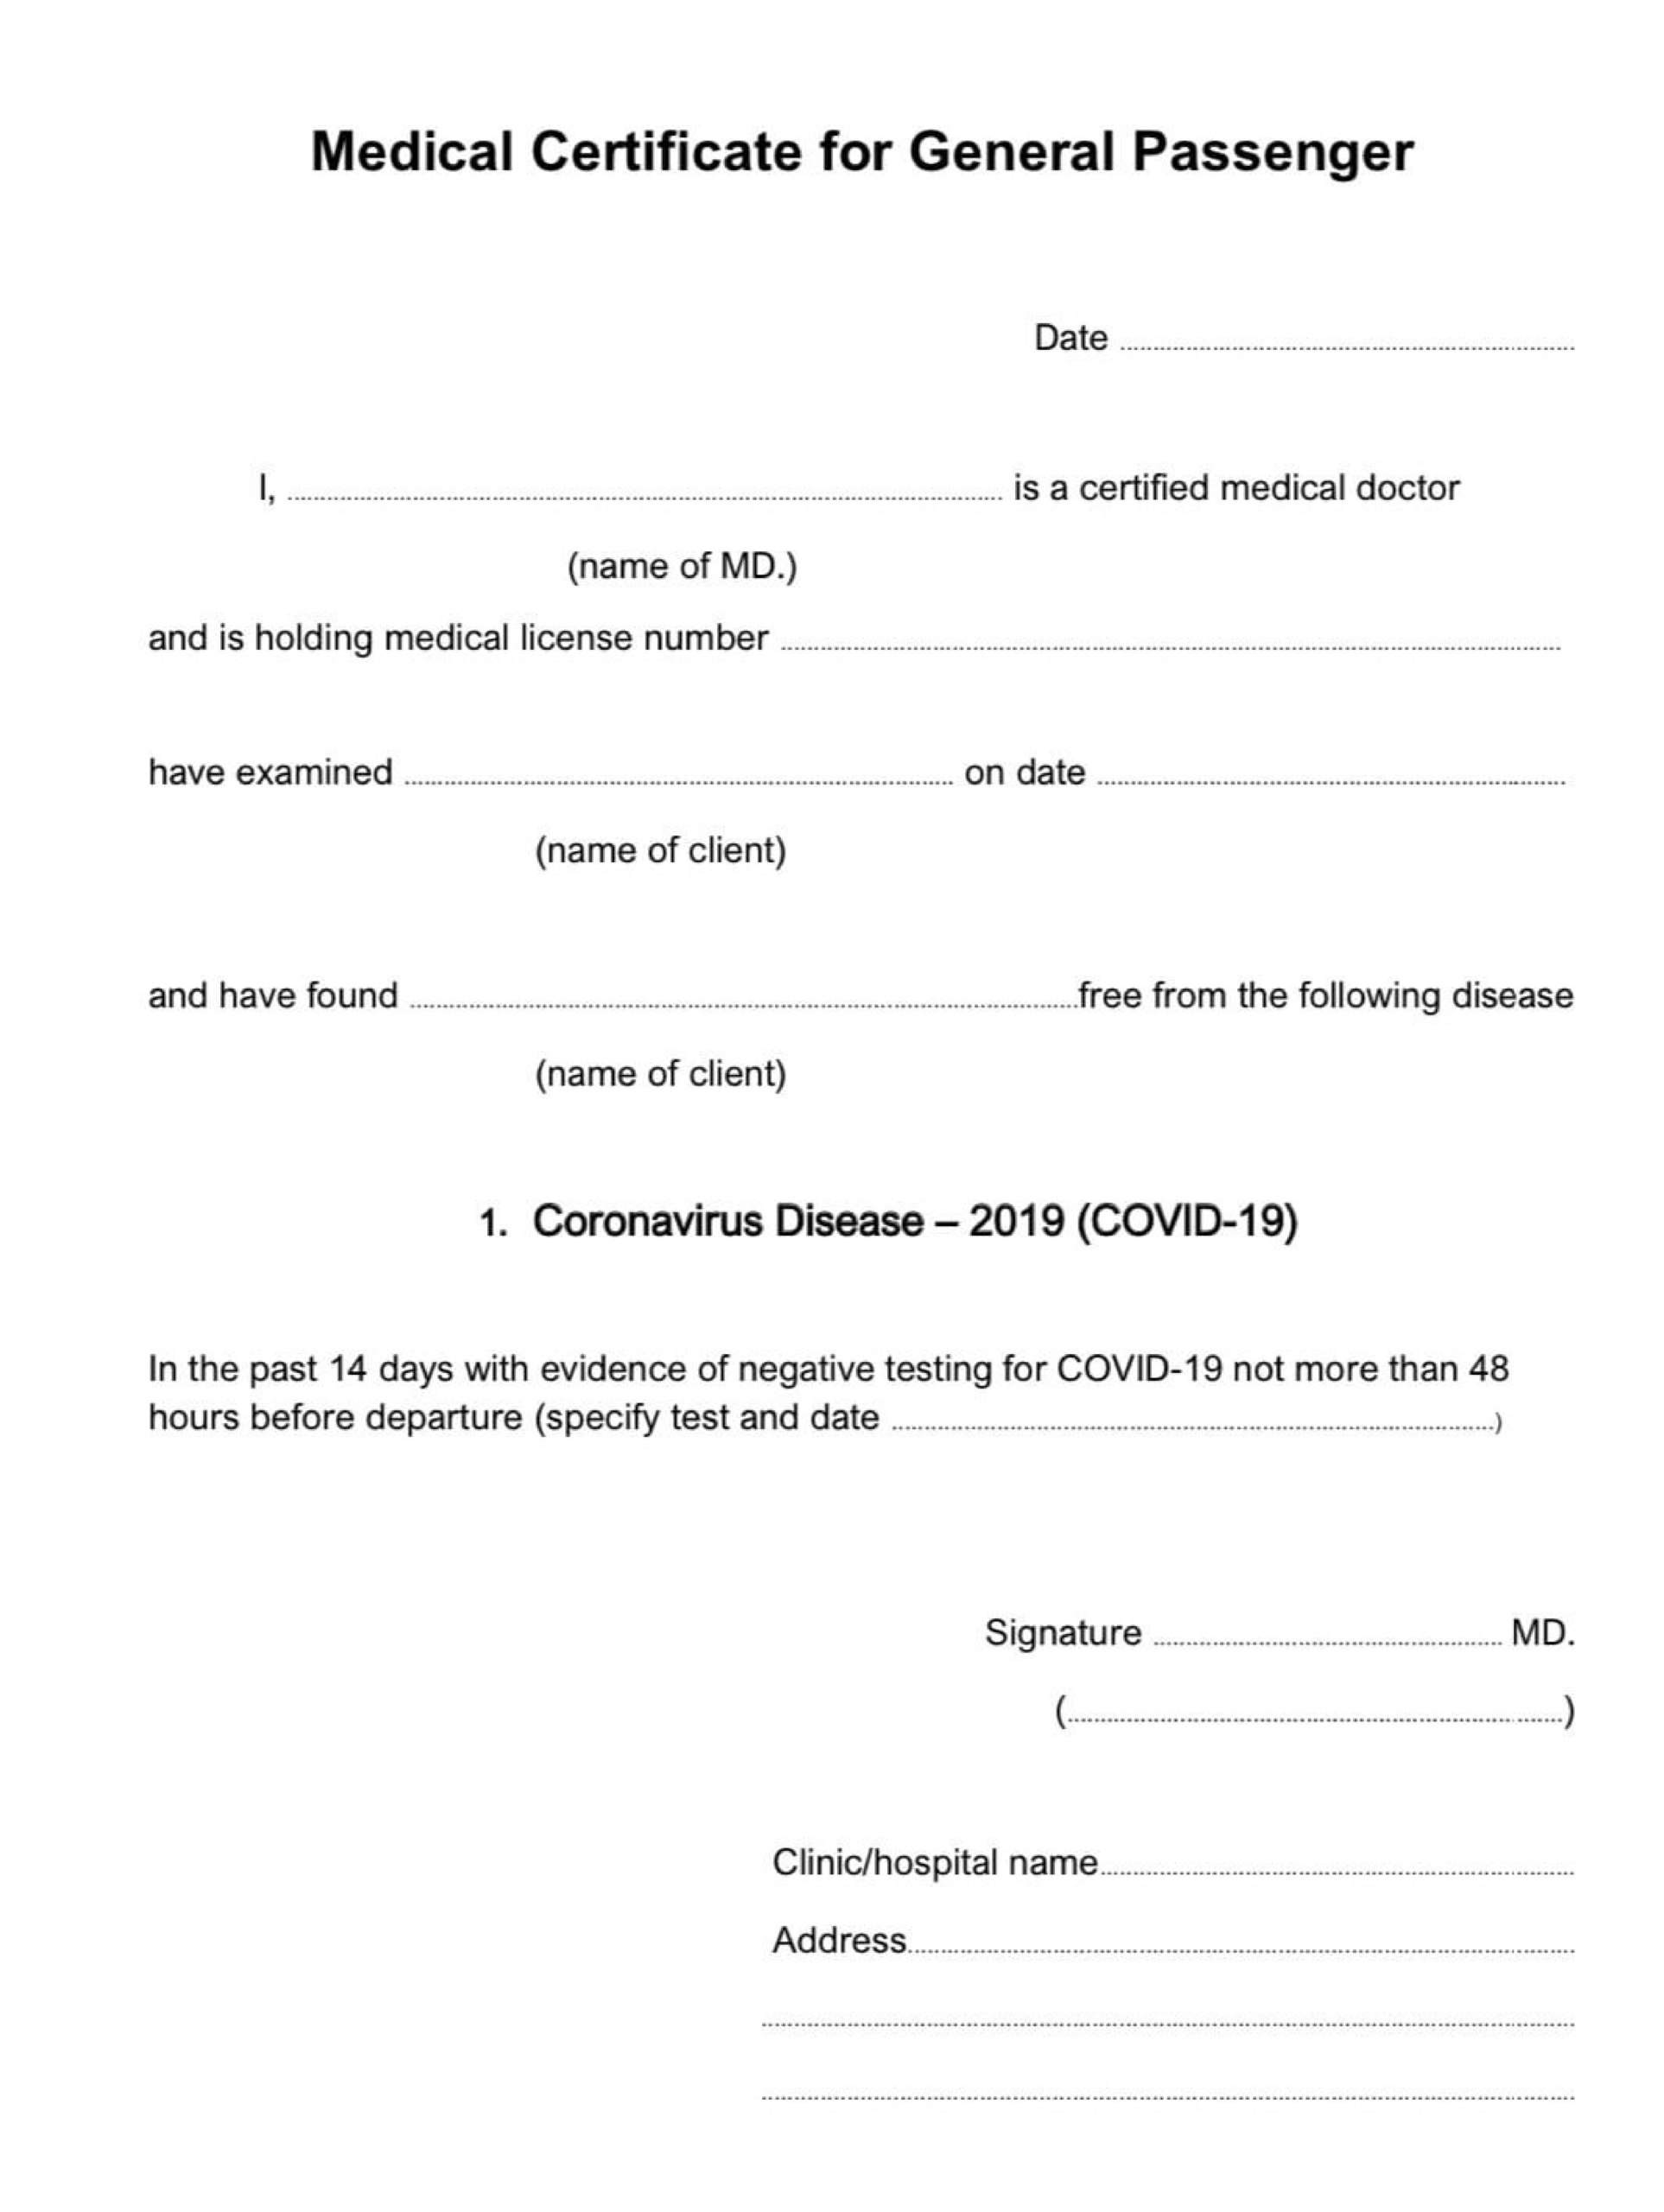 Covid19 Medical Certificate Fit To Fly | Templates At With Regard To Fake Medical Certificate Template Download